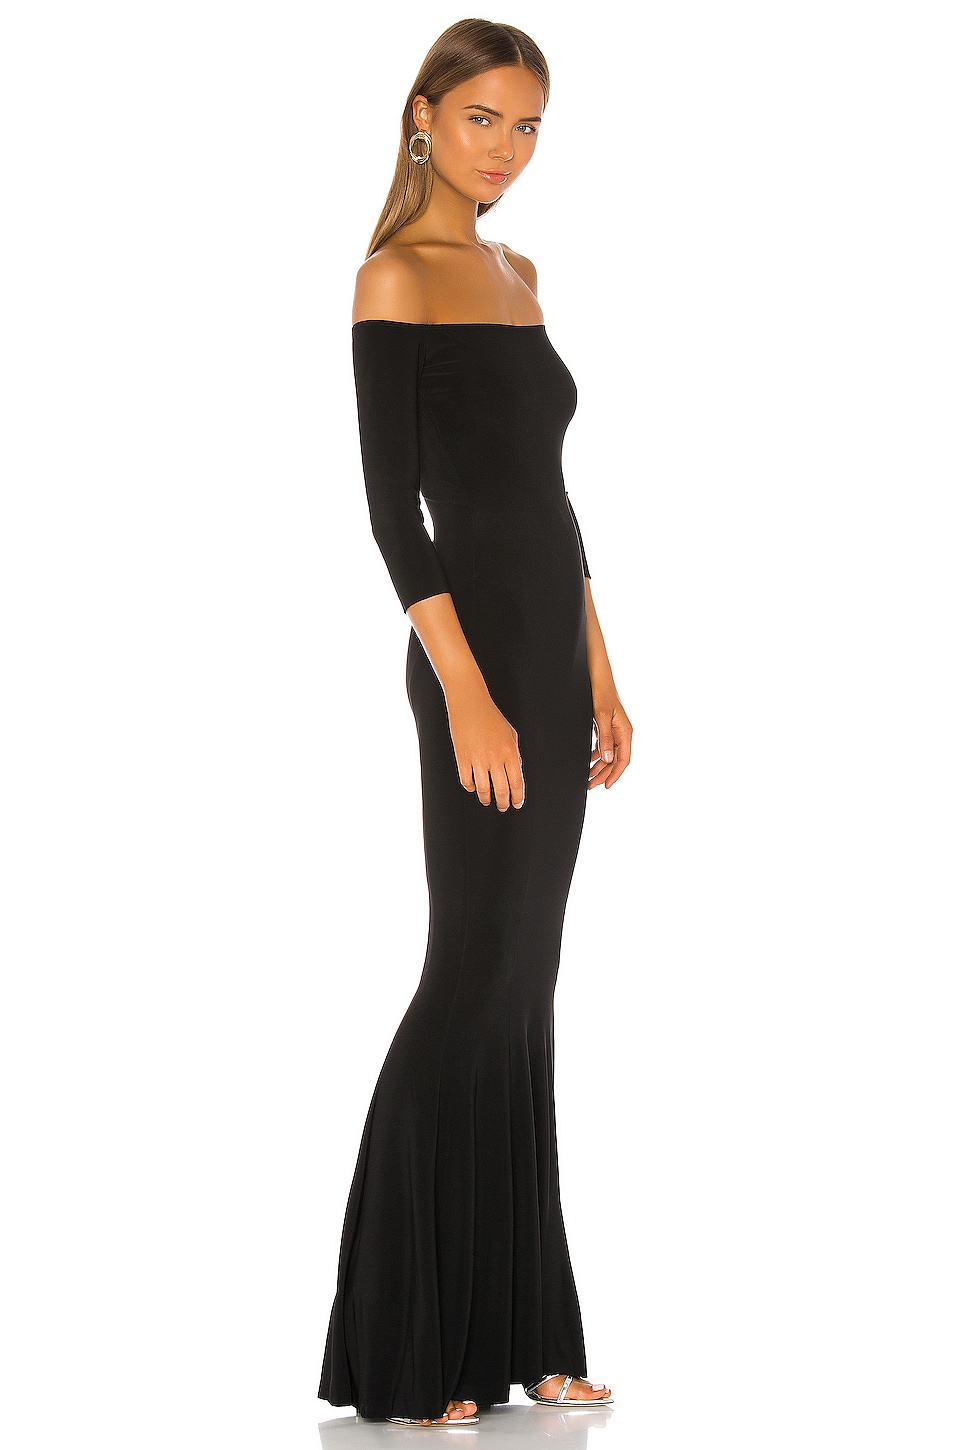 NORMA KAMALI OFF-THE-SHOULDER 3/4 SLEEVES FISHTAIL EVENING GOWN, BLACK ...